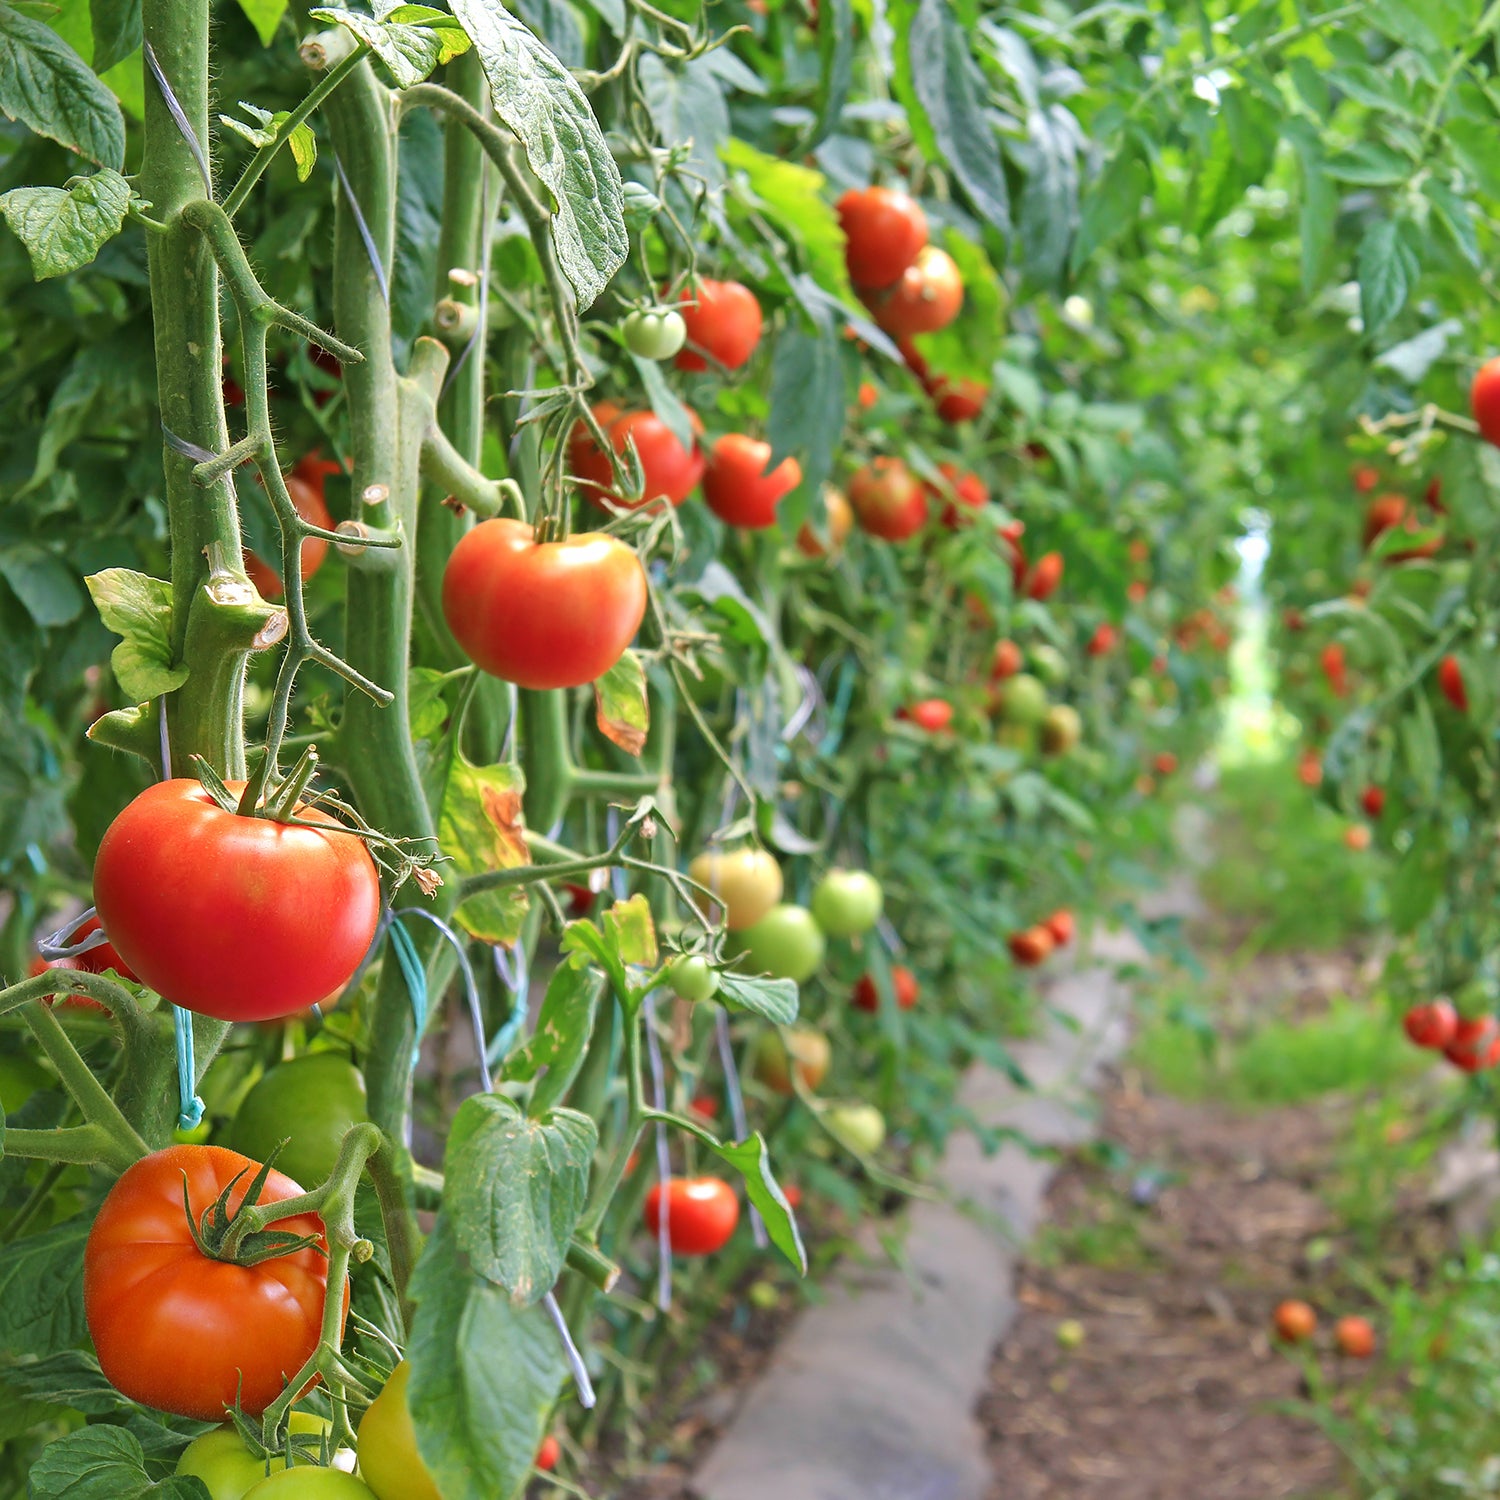 Albums 101+ Images a tomato plant is a type of angiosperm Latest